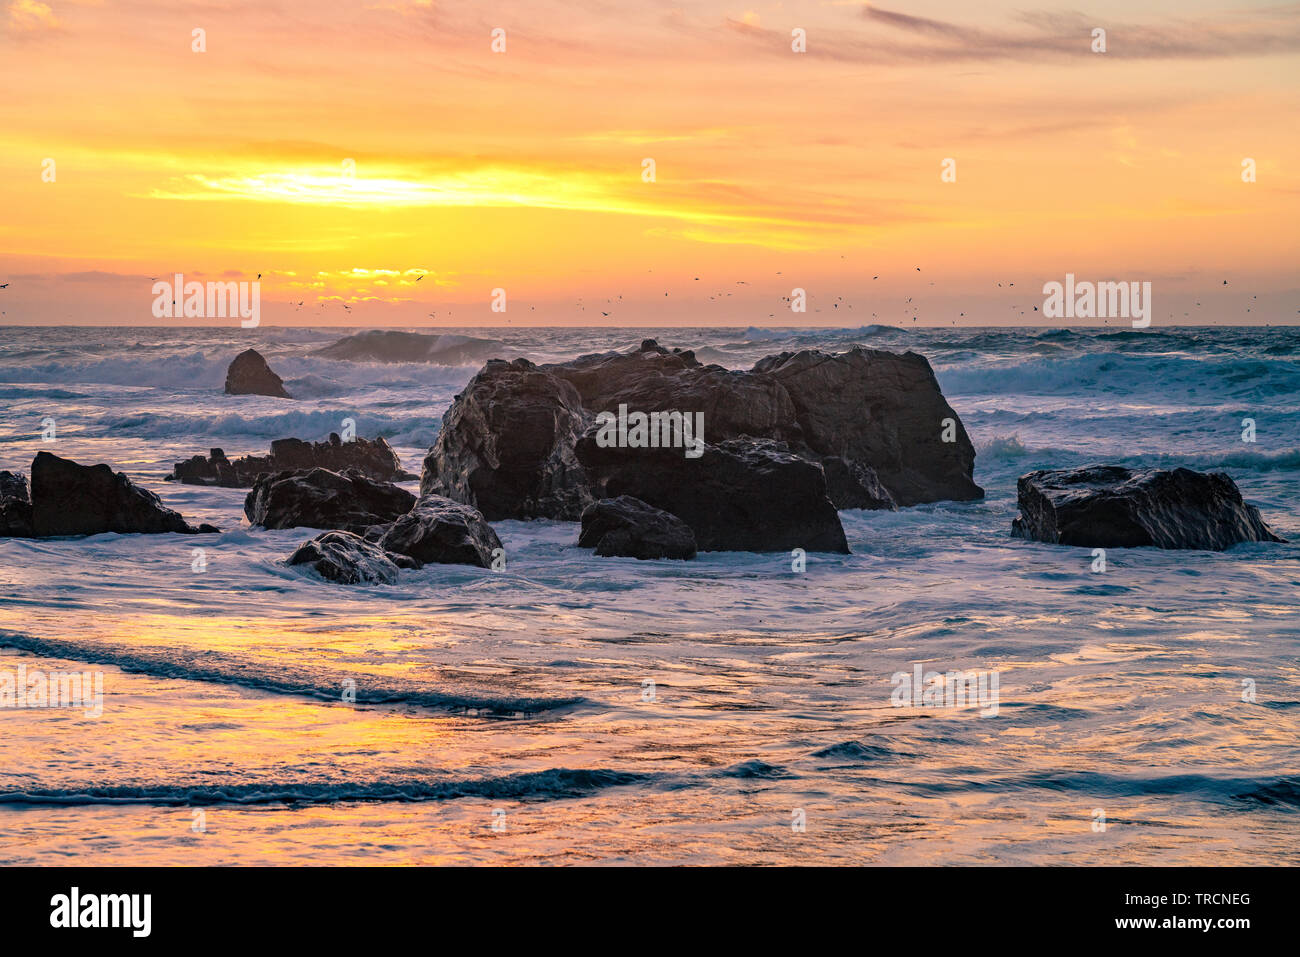 Big Sur, California - Beautiful sunset on a California beach with large waves crashing over rocks and a flock birds flying in the distance. Stock Photo